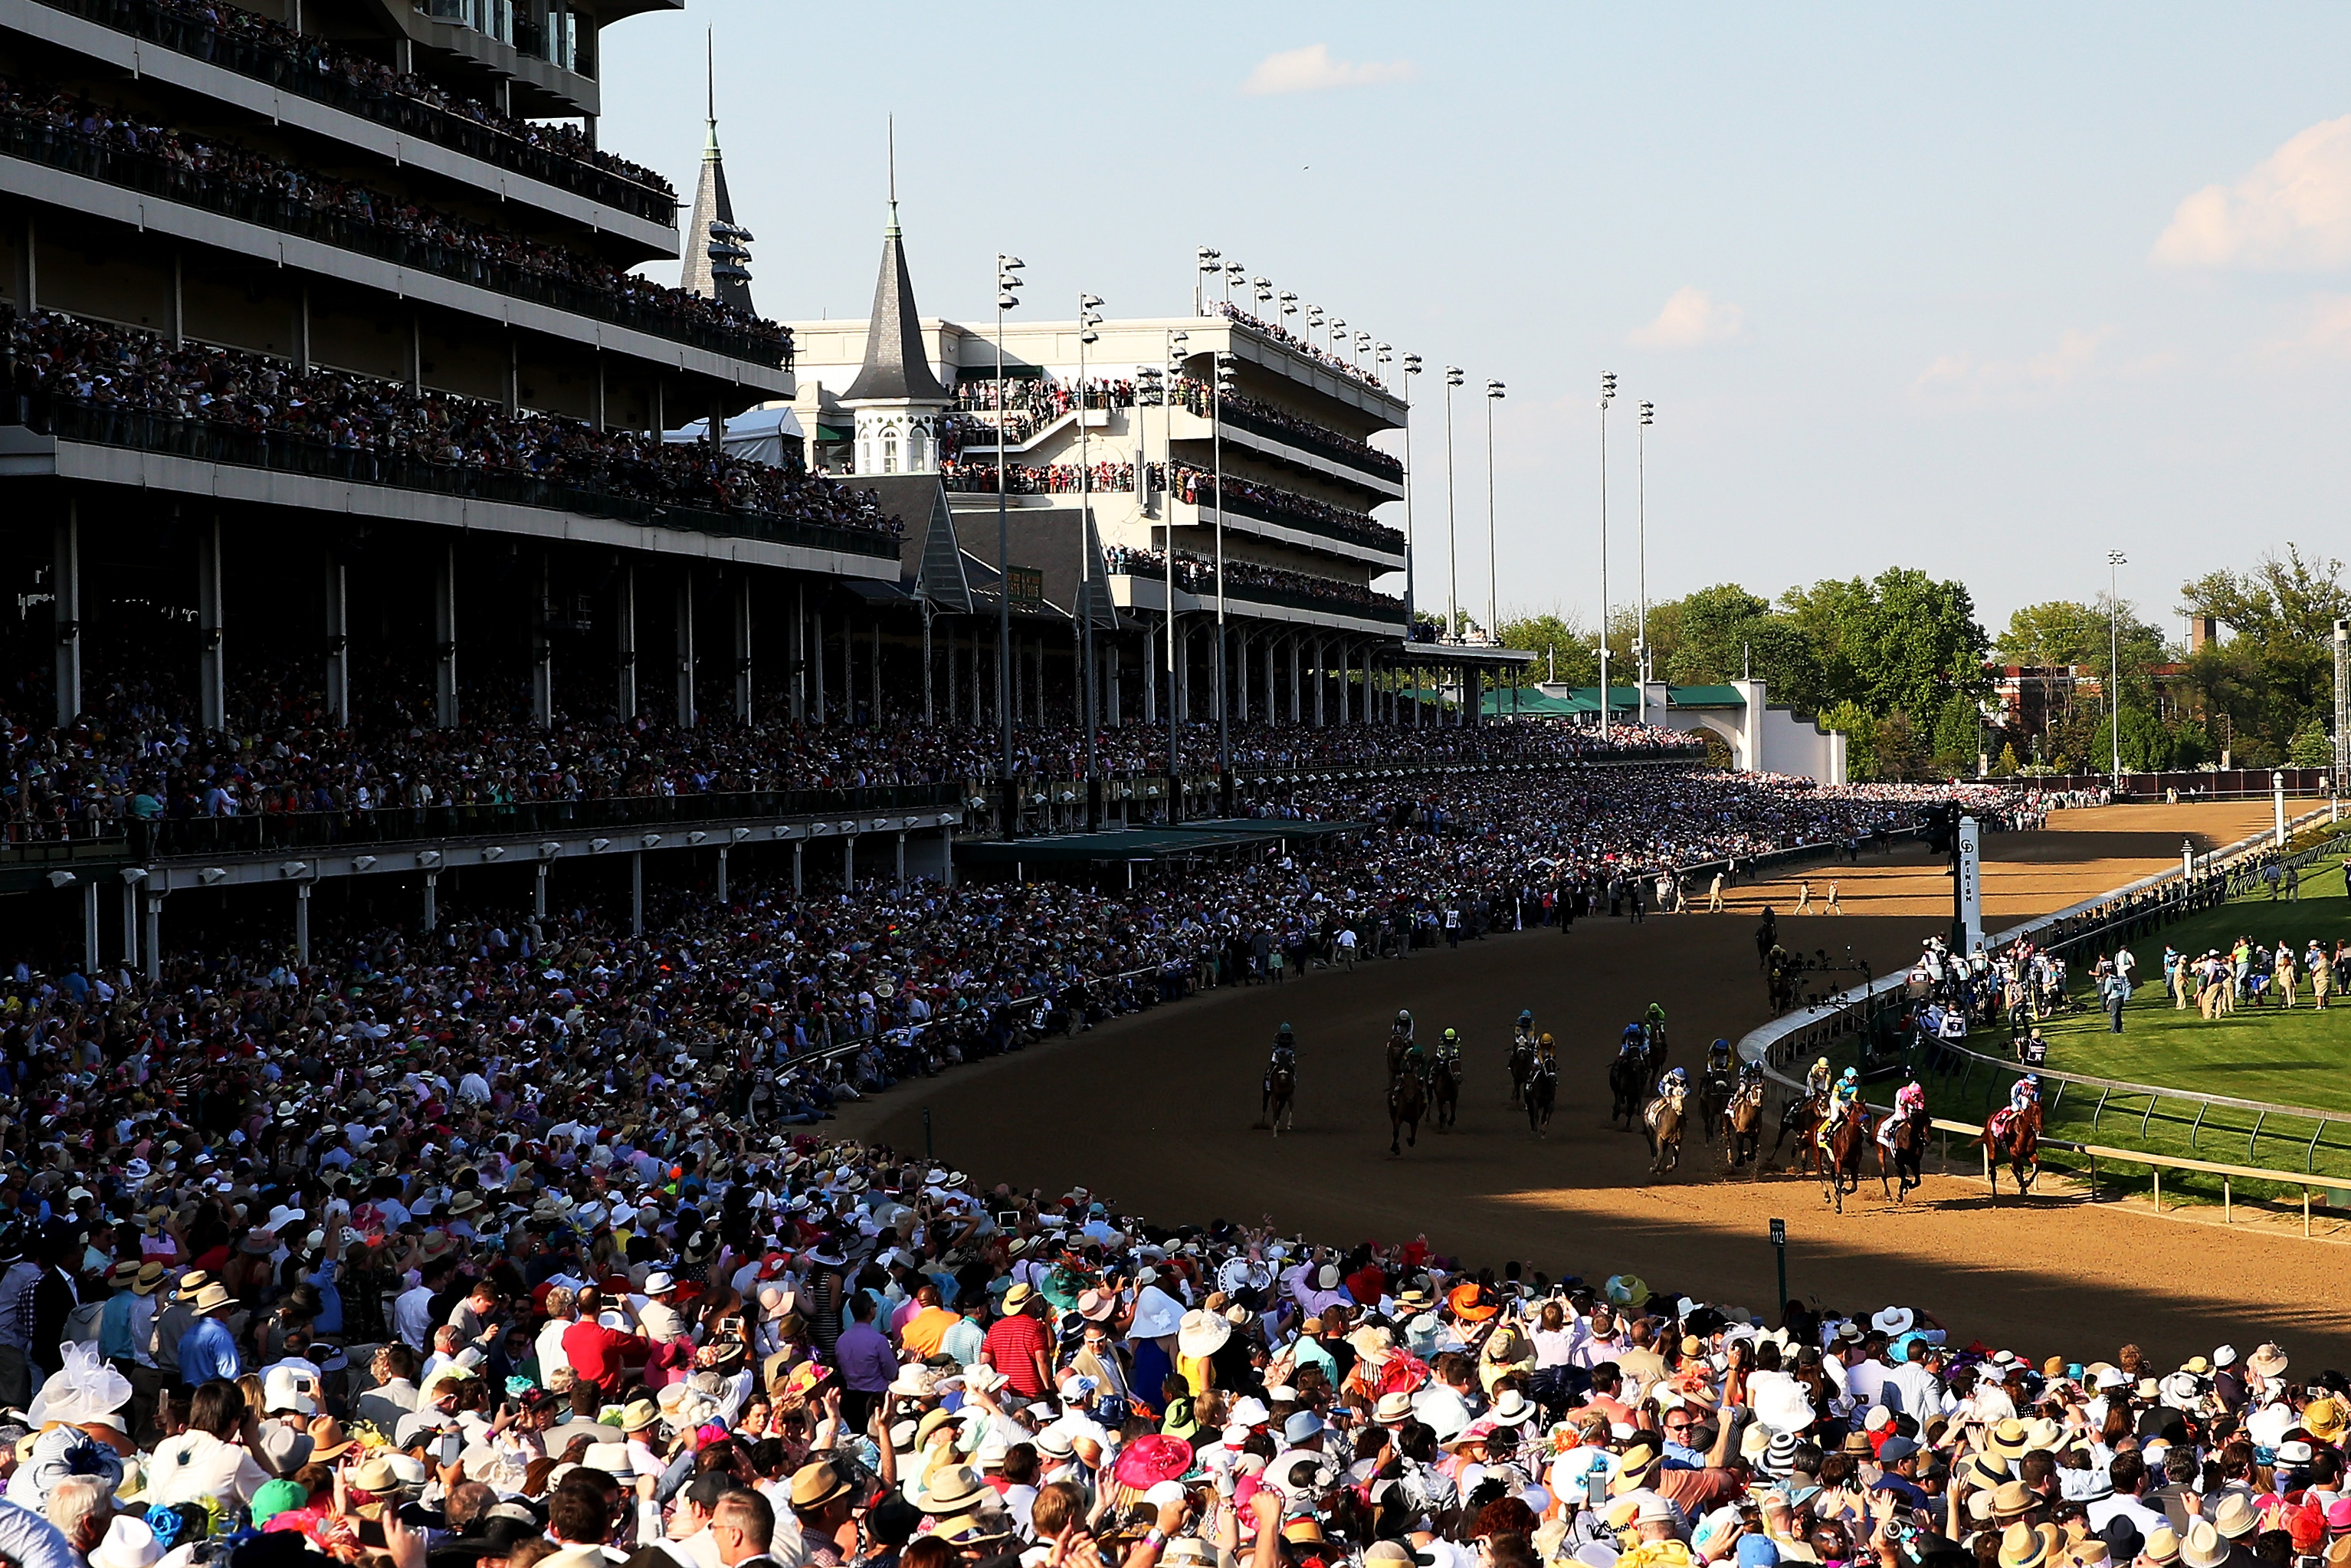 More than 170,000 people attended the Kentucky Derby in 2015, setting an attendance record for Churchill Downs.